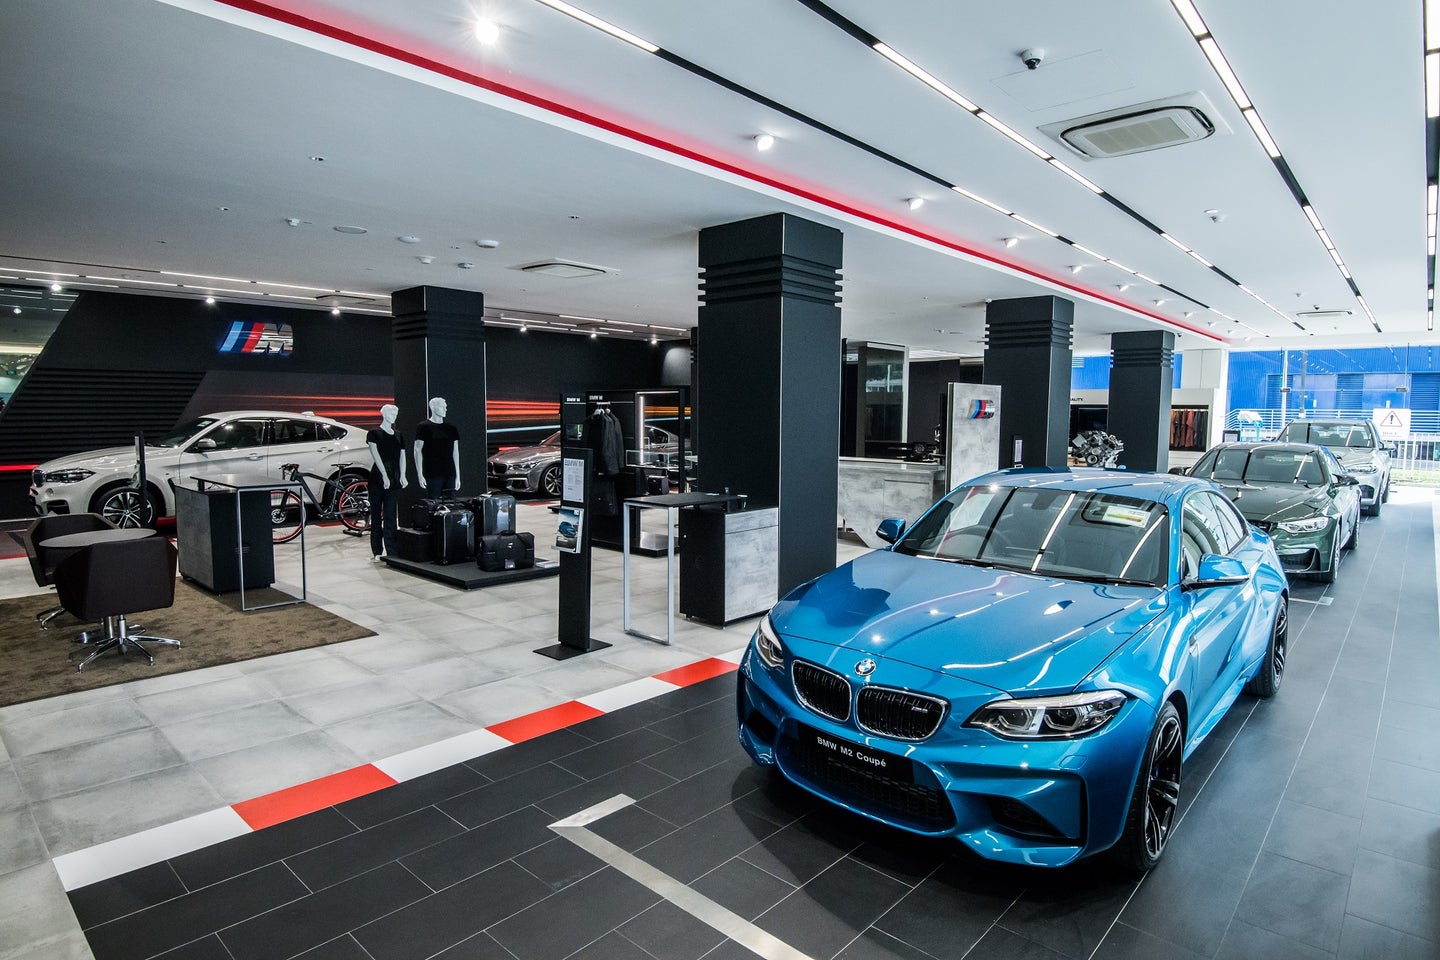 More Exclusive BMW M Showrooms Are on the Way